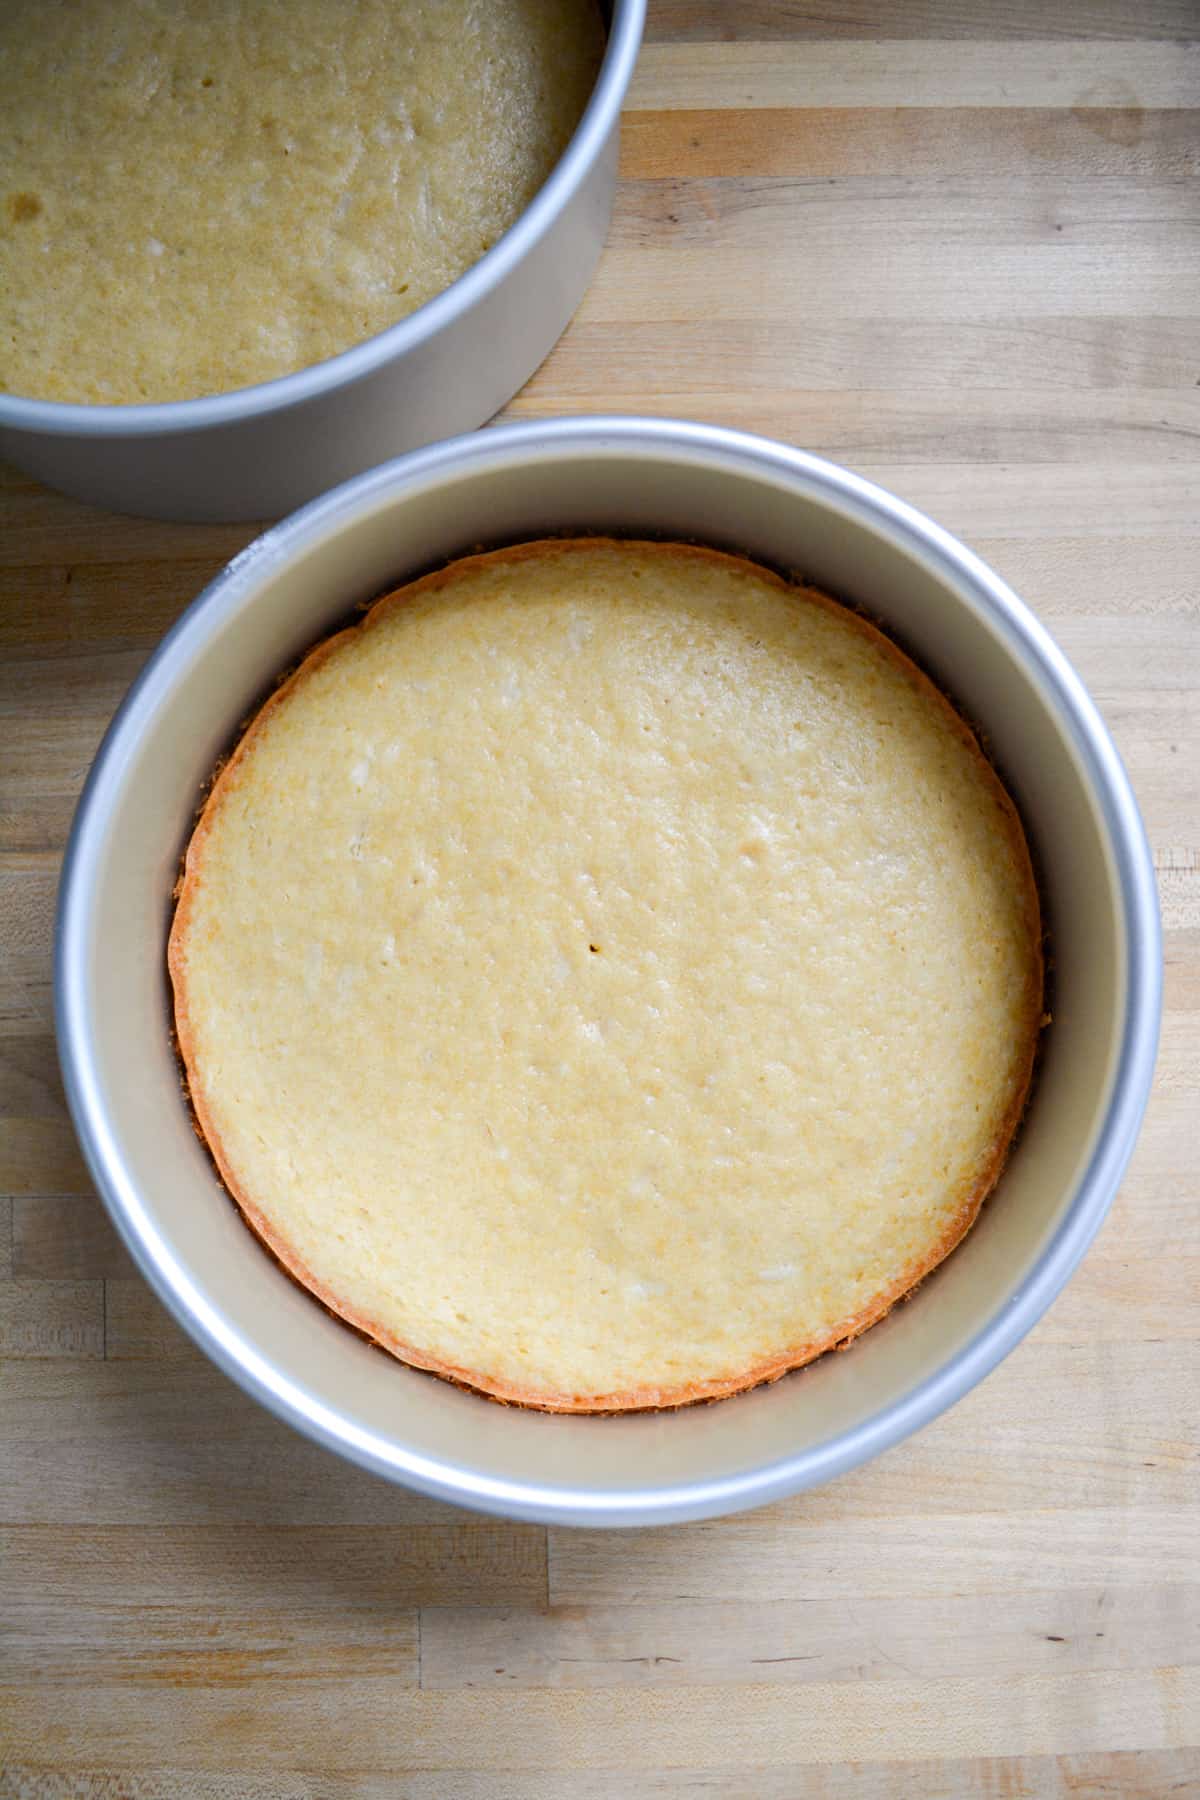 Baked cake layers in the round cake pans.